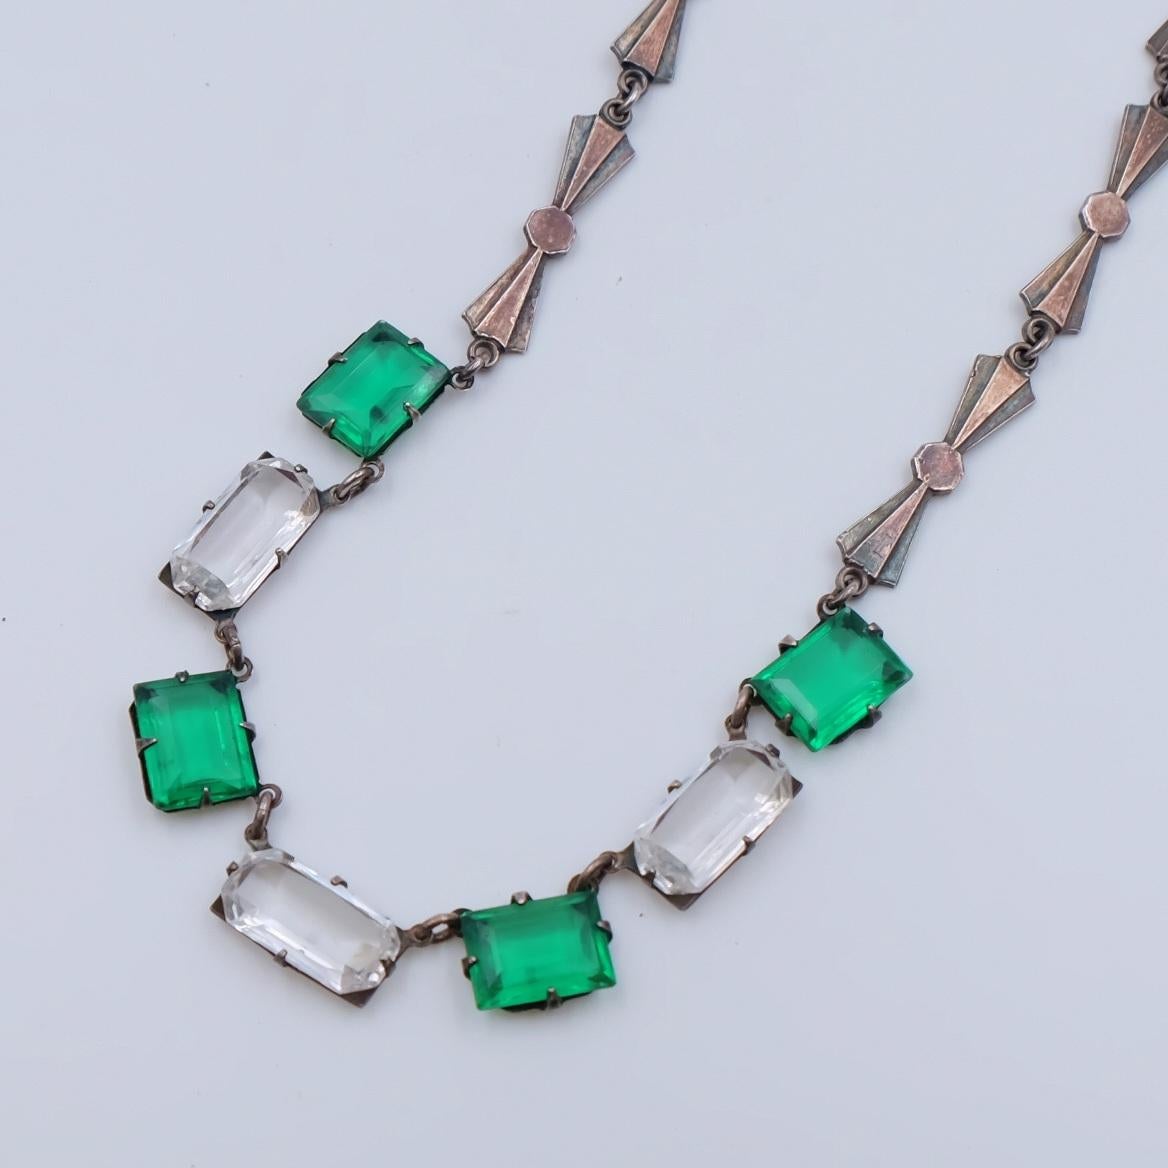 Antique Faux Emerald Necklace Art Deco Necklace 1930's In Good Condition For Sale In Austin, TX